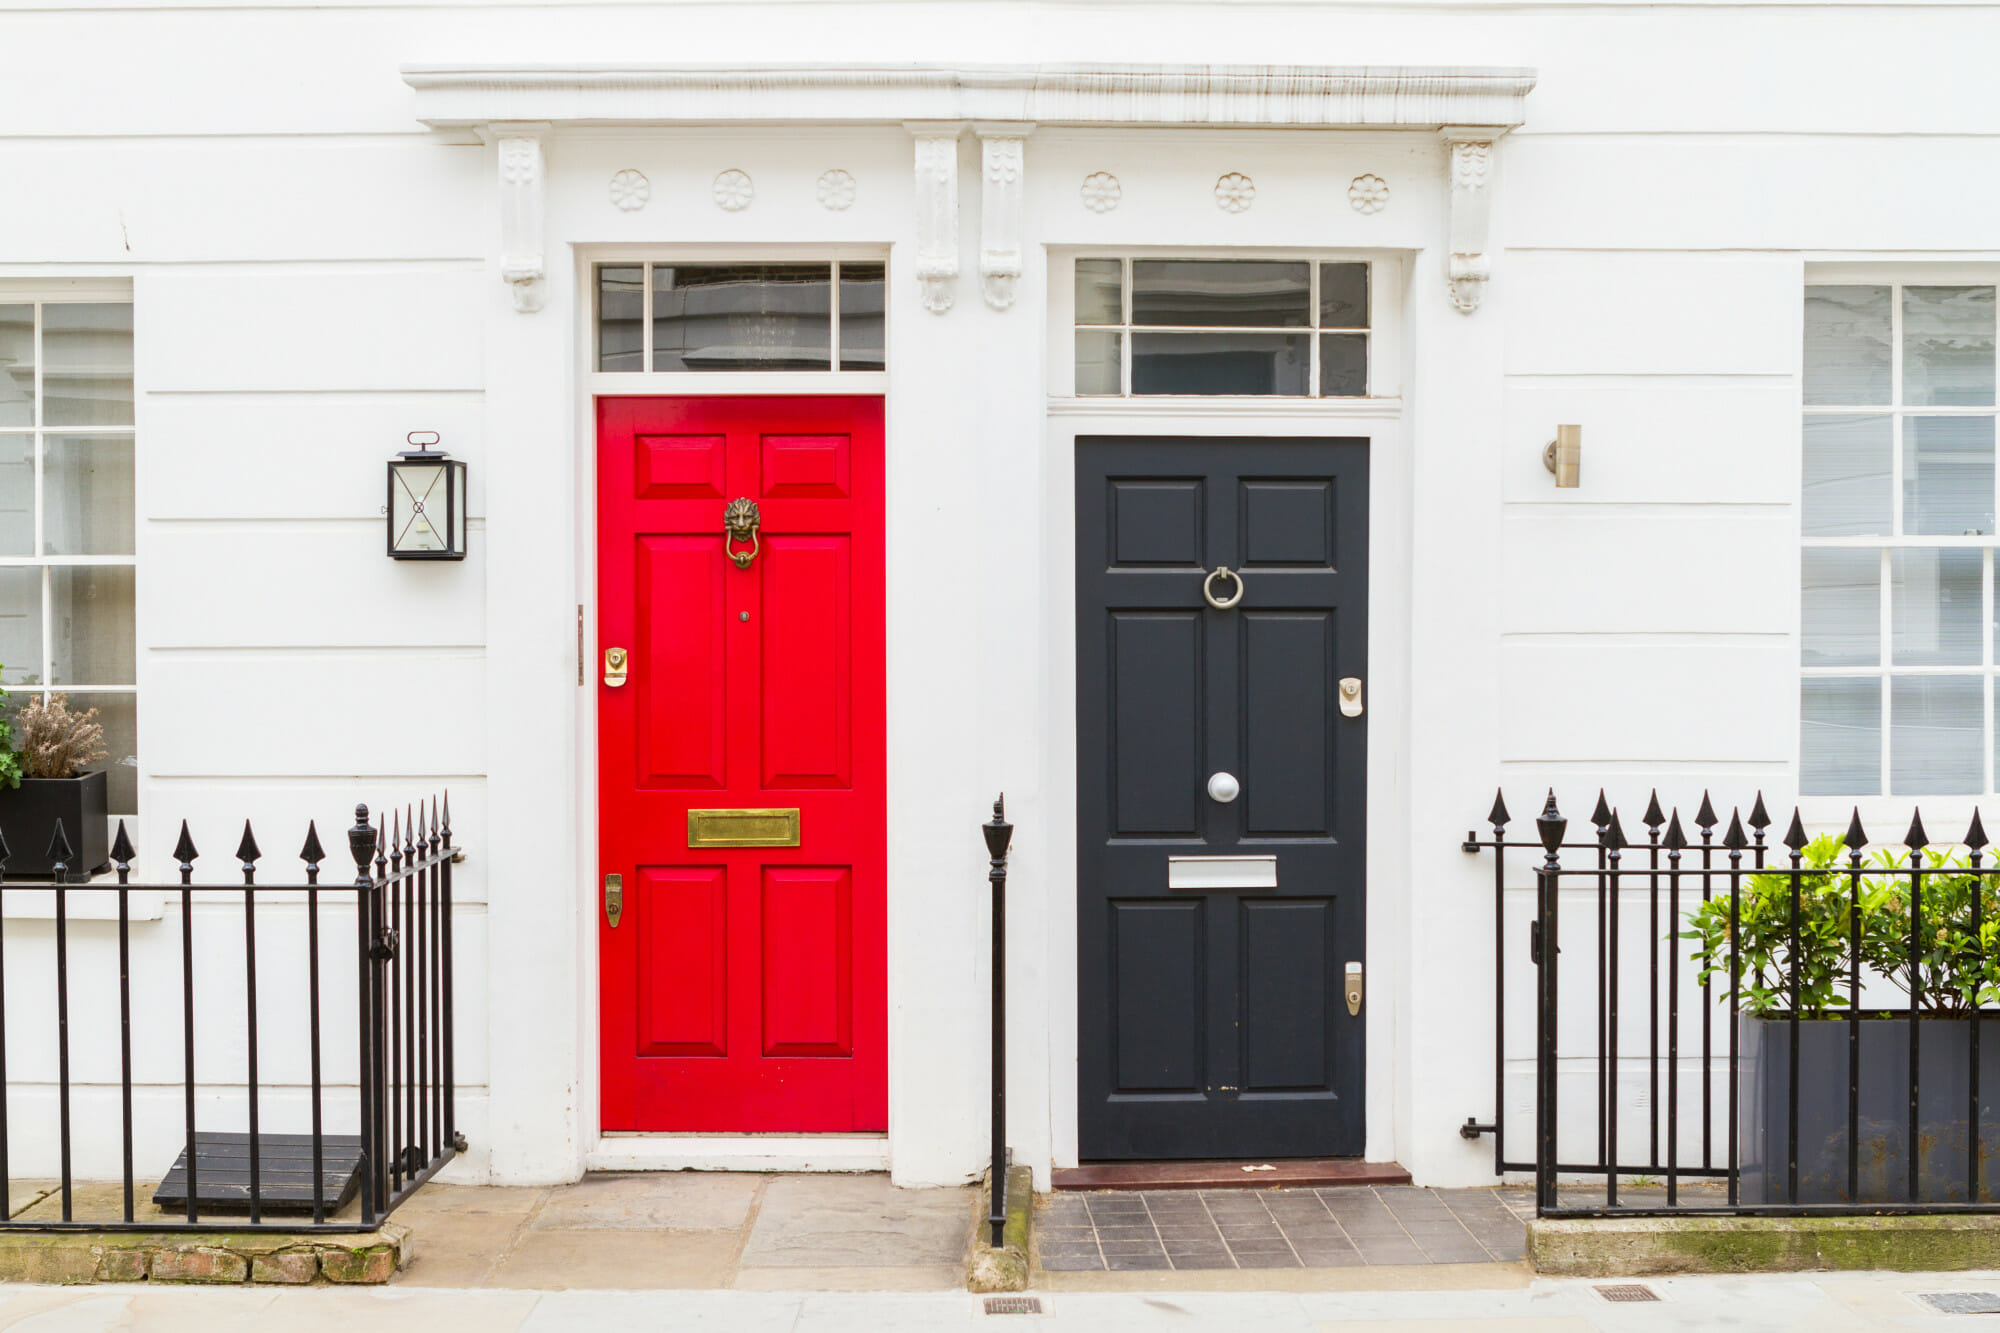 Like a financial adviser and a wealth manager, these two smart front doors in a Georgian terrace look pretty similar, but what are the houses like inside?